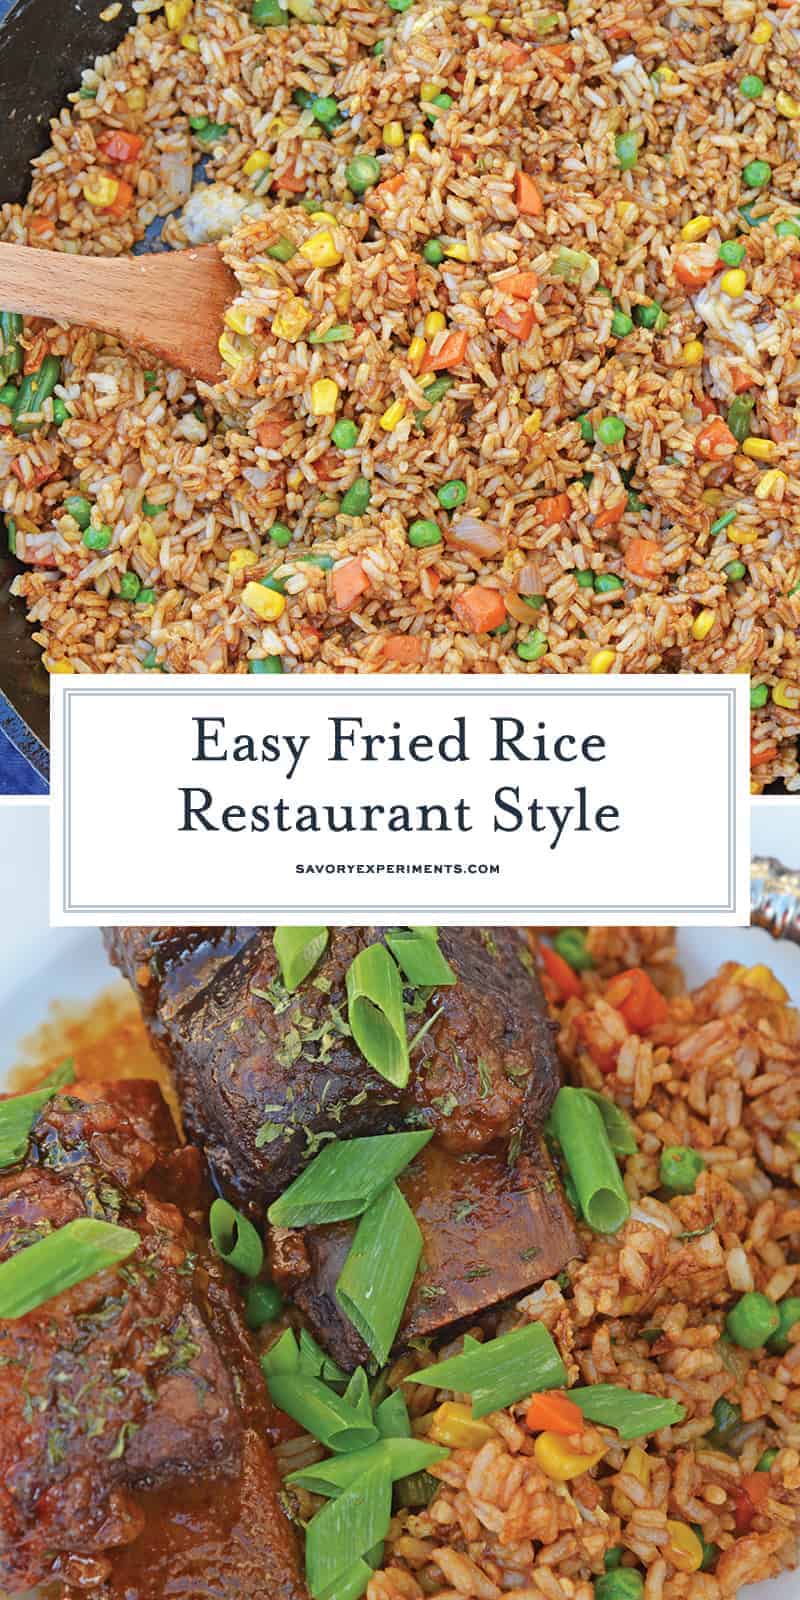 Easy Fried Rice is the best restaurant style fried rice you'll ever make! Just 15 minutes and a great way to clean out the vegetable drawer. #easyfriedrice #friedricerecipe www.savoryexperiments.com 